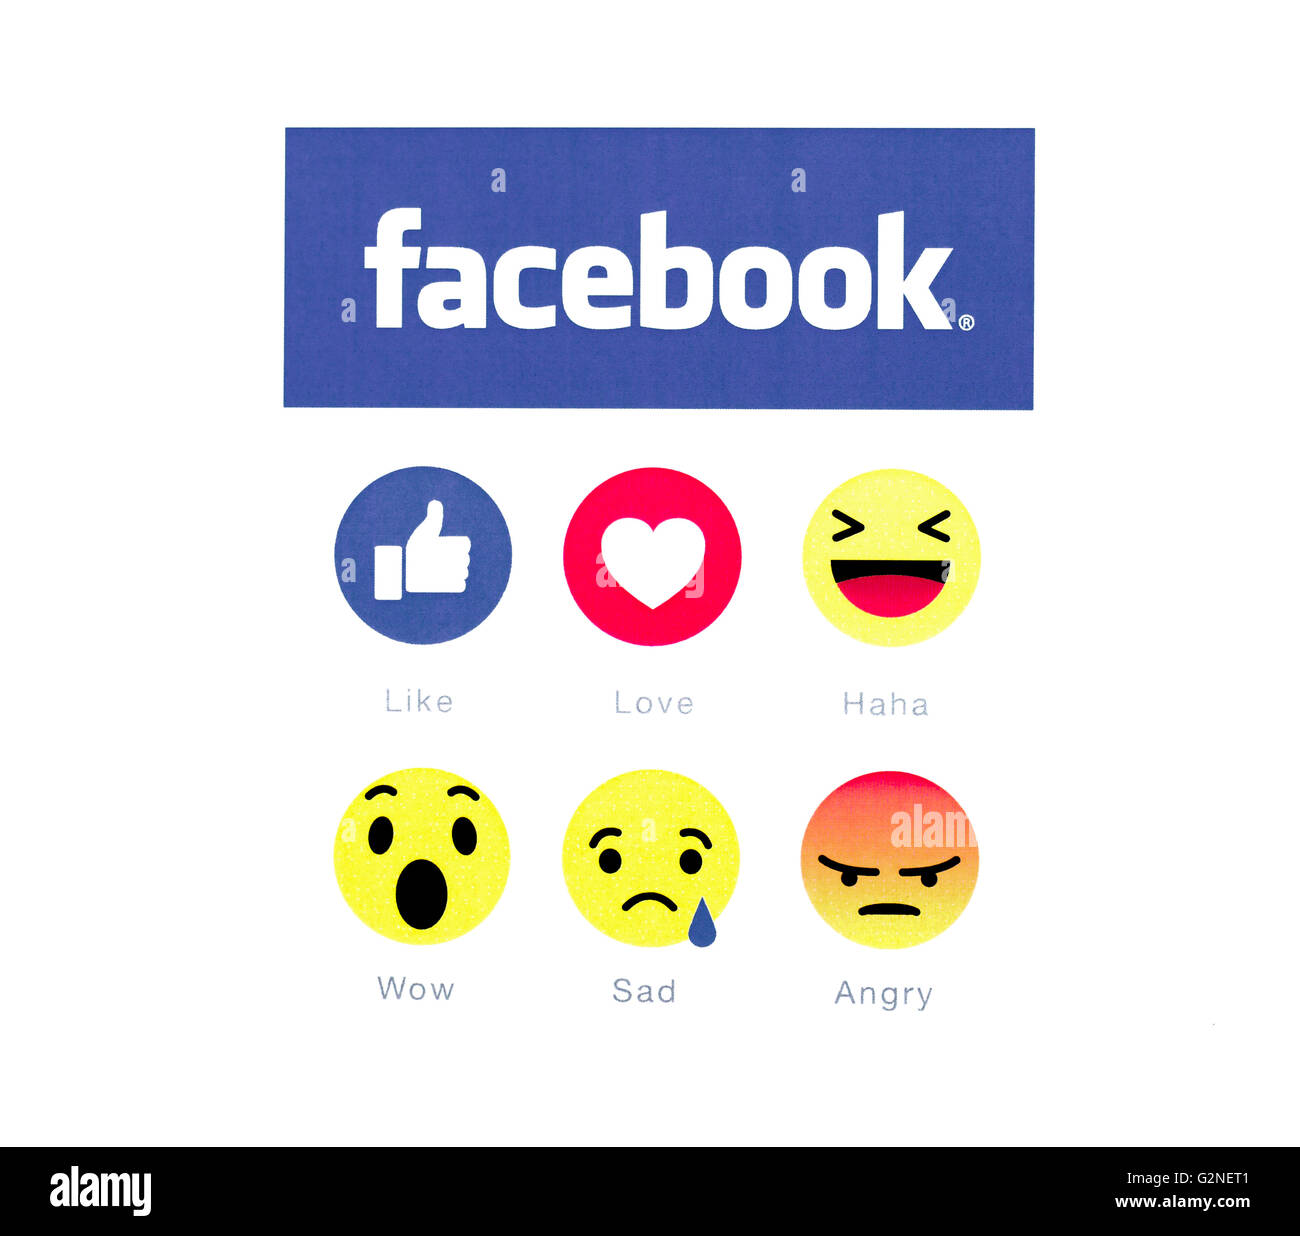 Belchatow, Poland - May 23, 2016: Facebook logo and button 6 emoji icon printed on white paper. Stock Photo